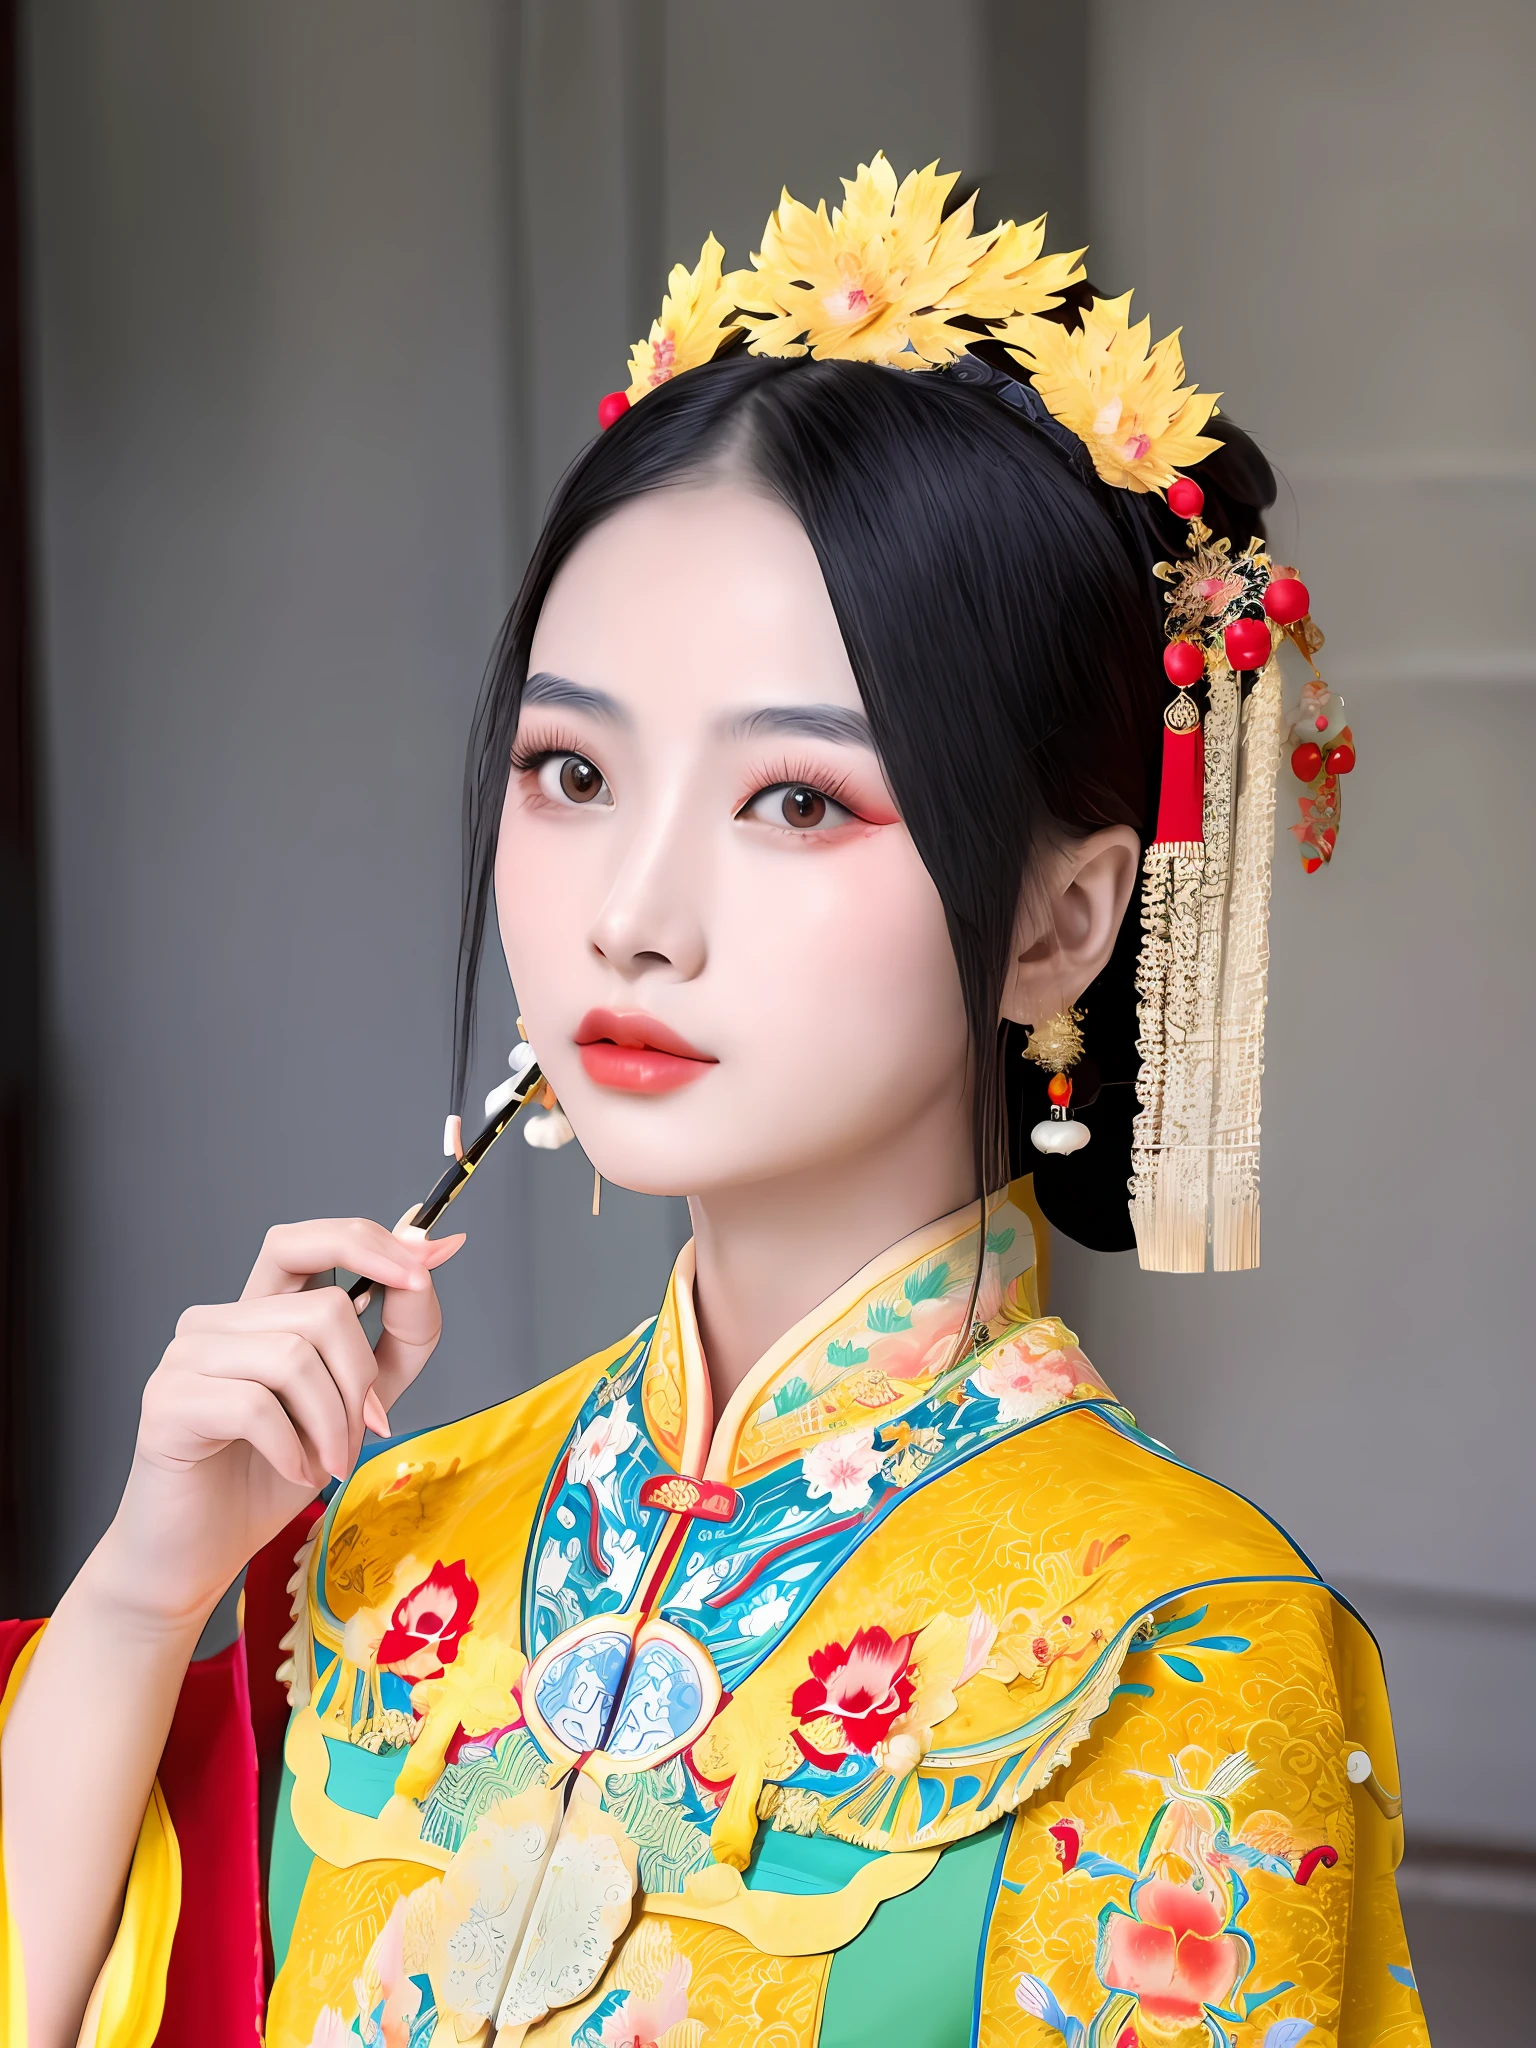 Chinese woman, traditional makeup, traditional beauty, Ruan family beauty! , Yunling, Chinese traditional, gorgeous Chinese model, wearing ancient Chinese costumes, Chinese girl, Chinese empress, palace, Hanfu girl, cheongsam, Chinese princess, inspired by Huang Ji, young and cute wan Asian face